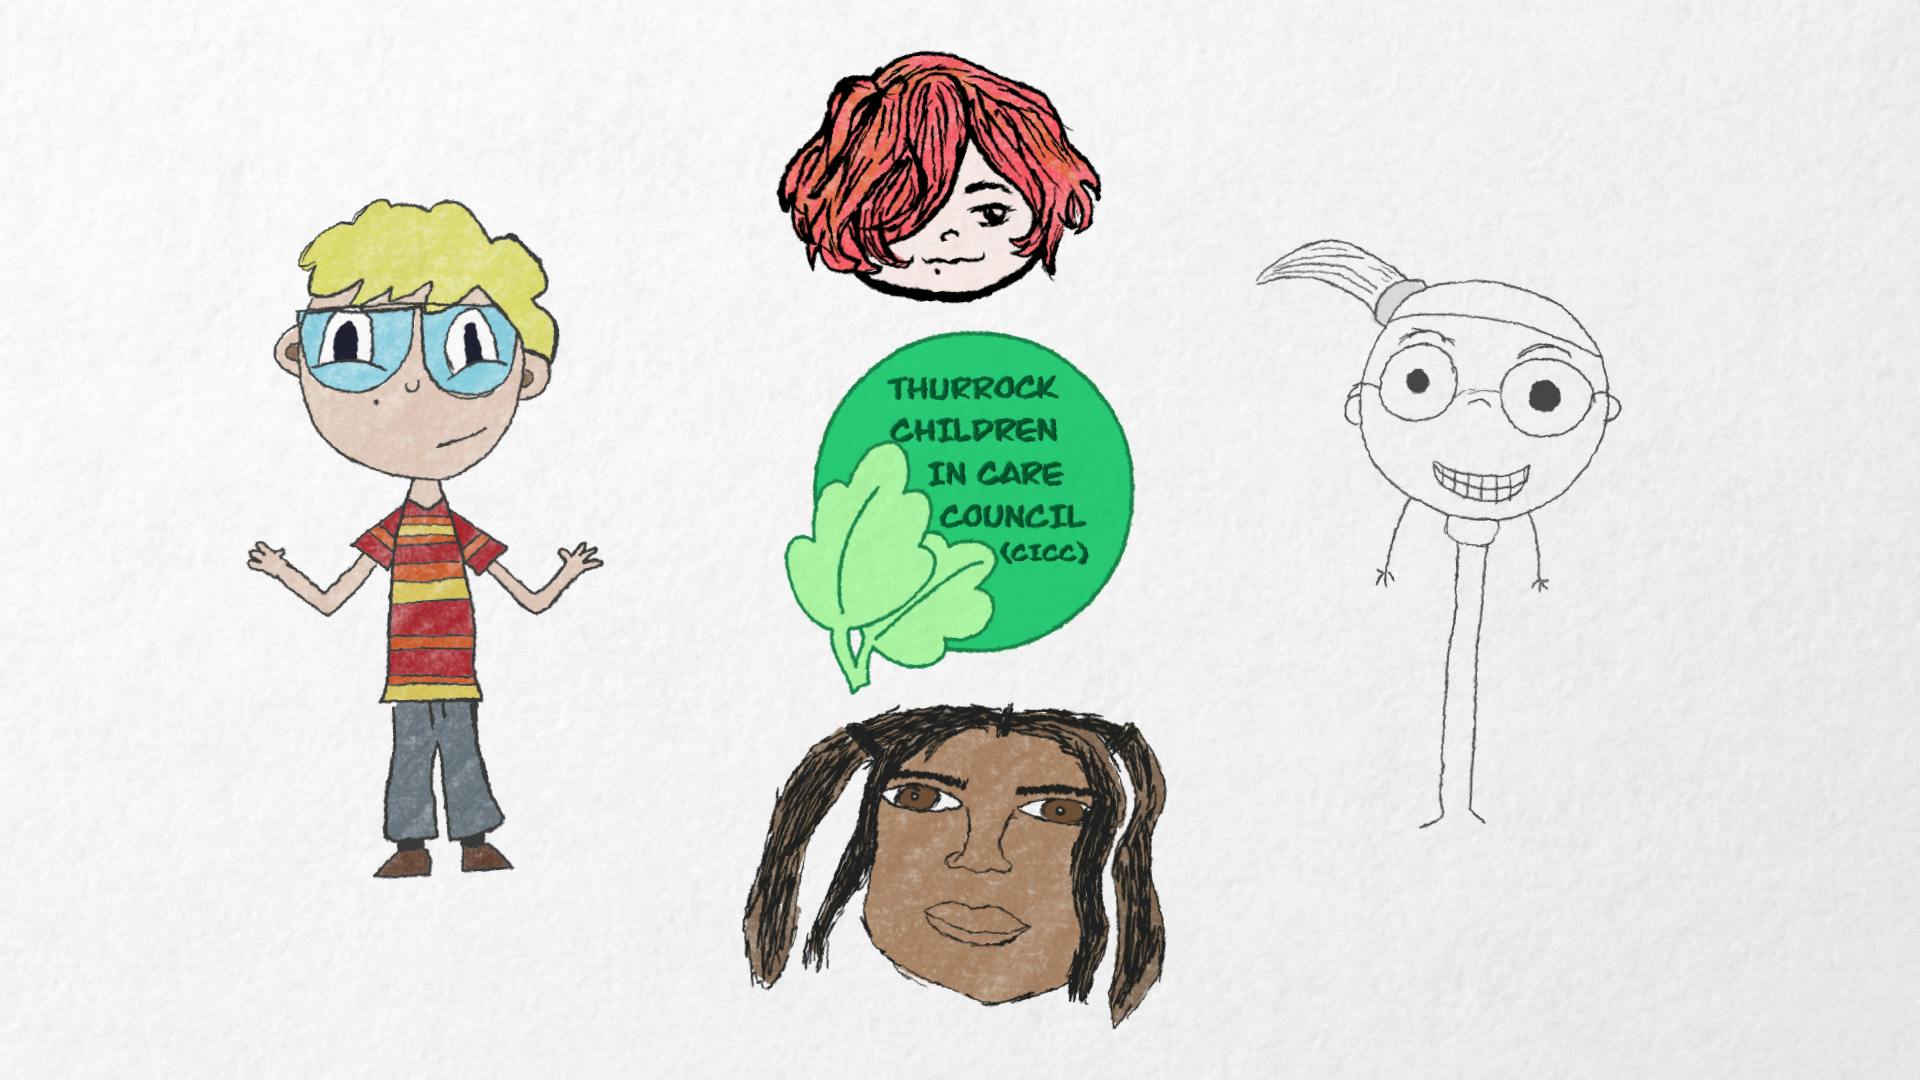 Thurrock Children in Care Council Animation